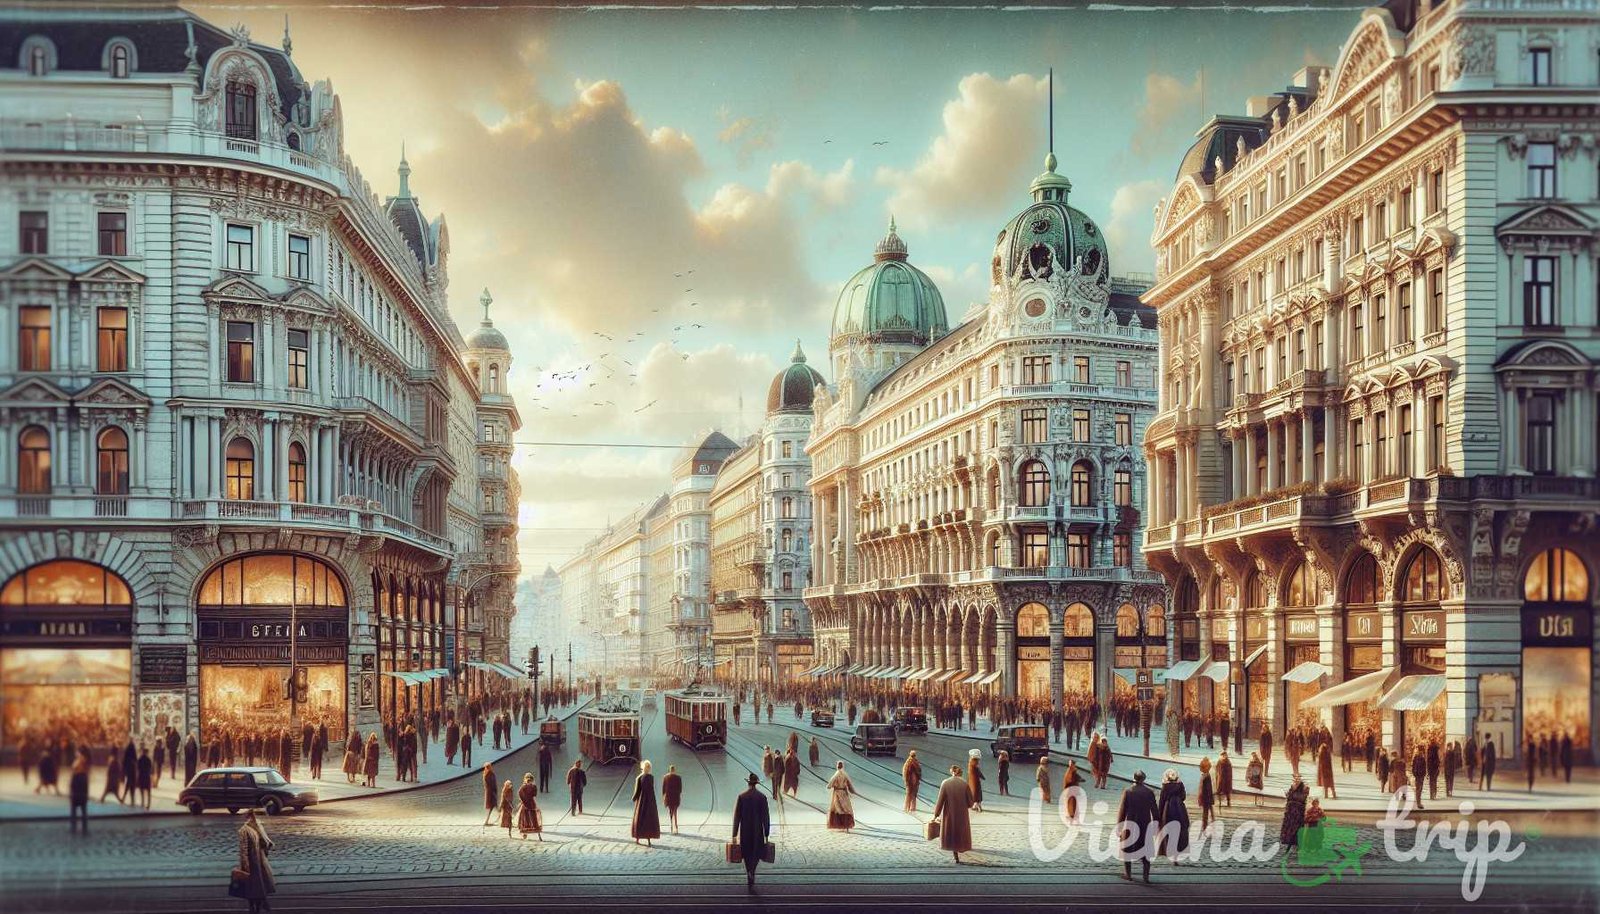 Illustration for section: The Allure of the Ringstrasse The Ringstrasse is a grand boulevard that encircles Vienna's historic  - viennas hidden stories